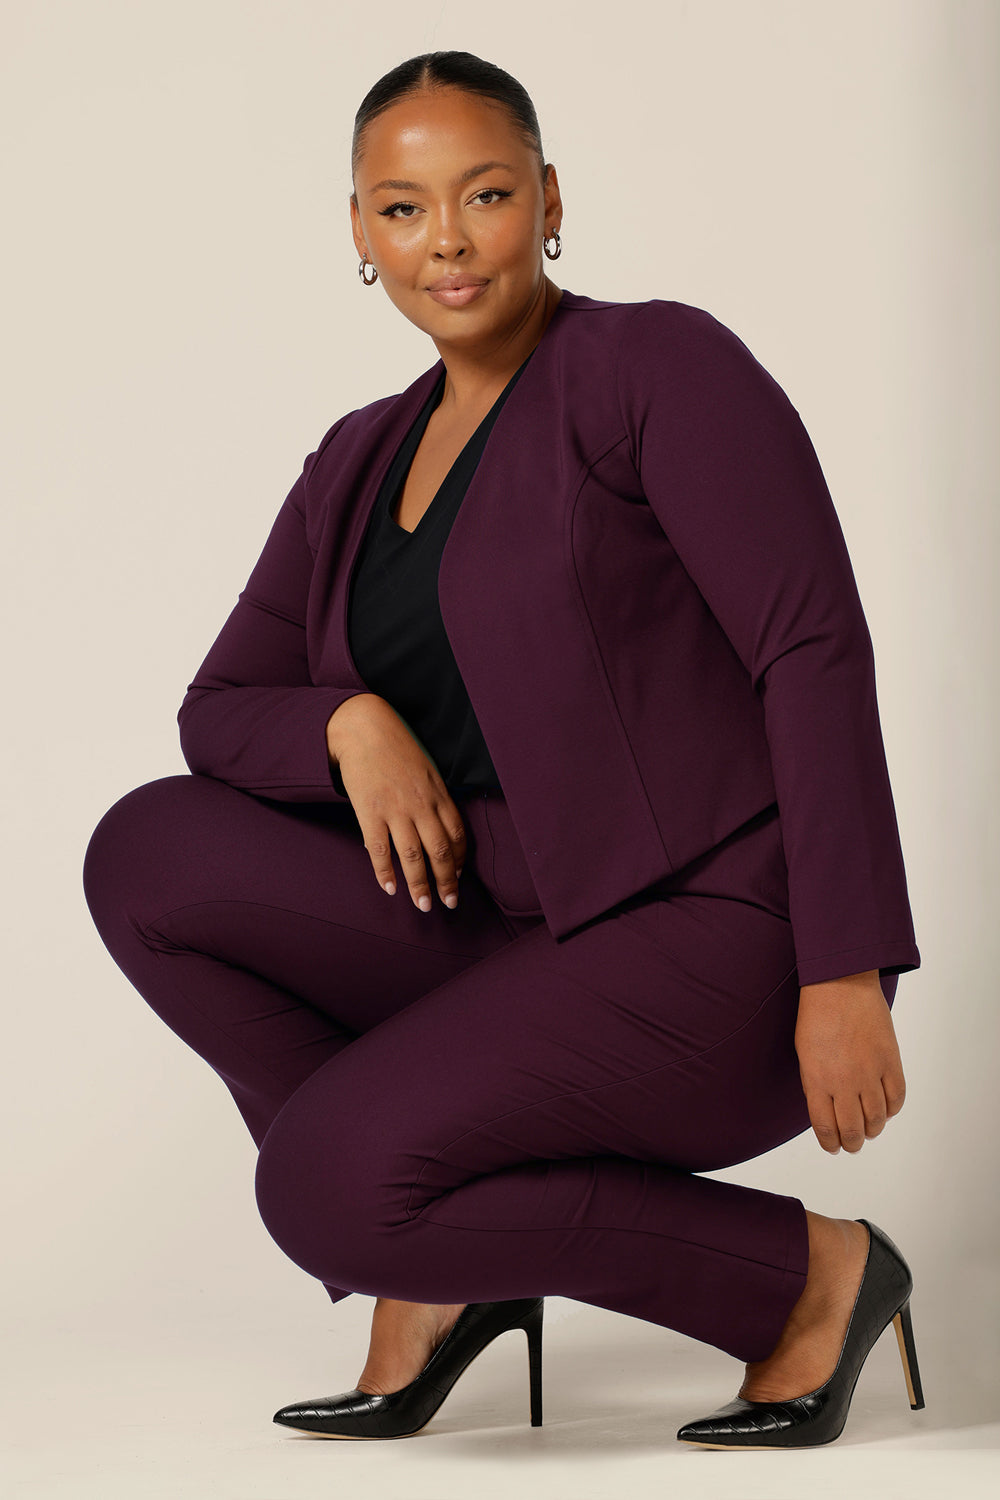 A good workwear jacket for plus size women, the Mackenzie Jacket in Mulberry is available to shop in sizes 8 to 24. Made in Australia by Australian and New Zealand womenswear brand, L&F, this work jacket is a collarless and open fronted with long sleeves and an angled hem. This corporate jacket is worn with slim leg pants and a black, V-neck top.